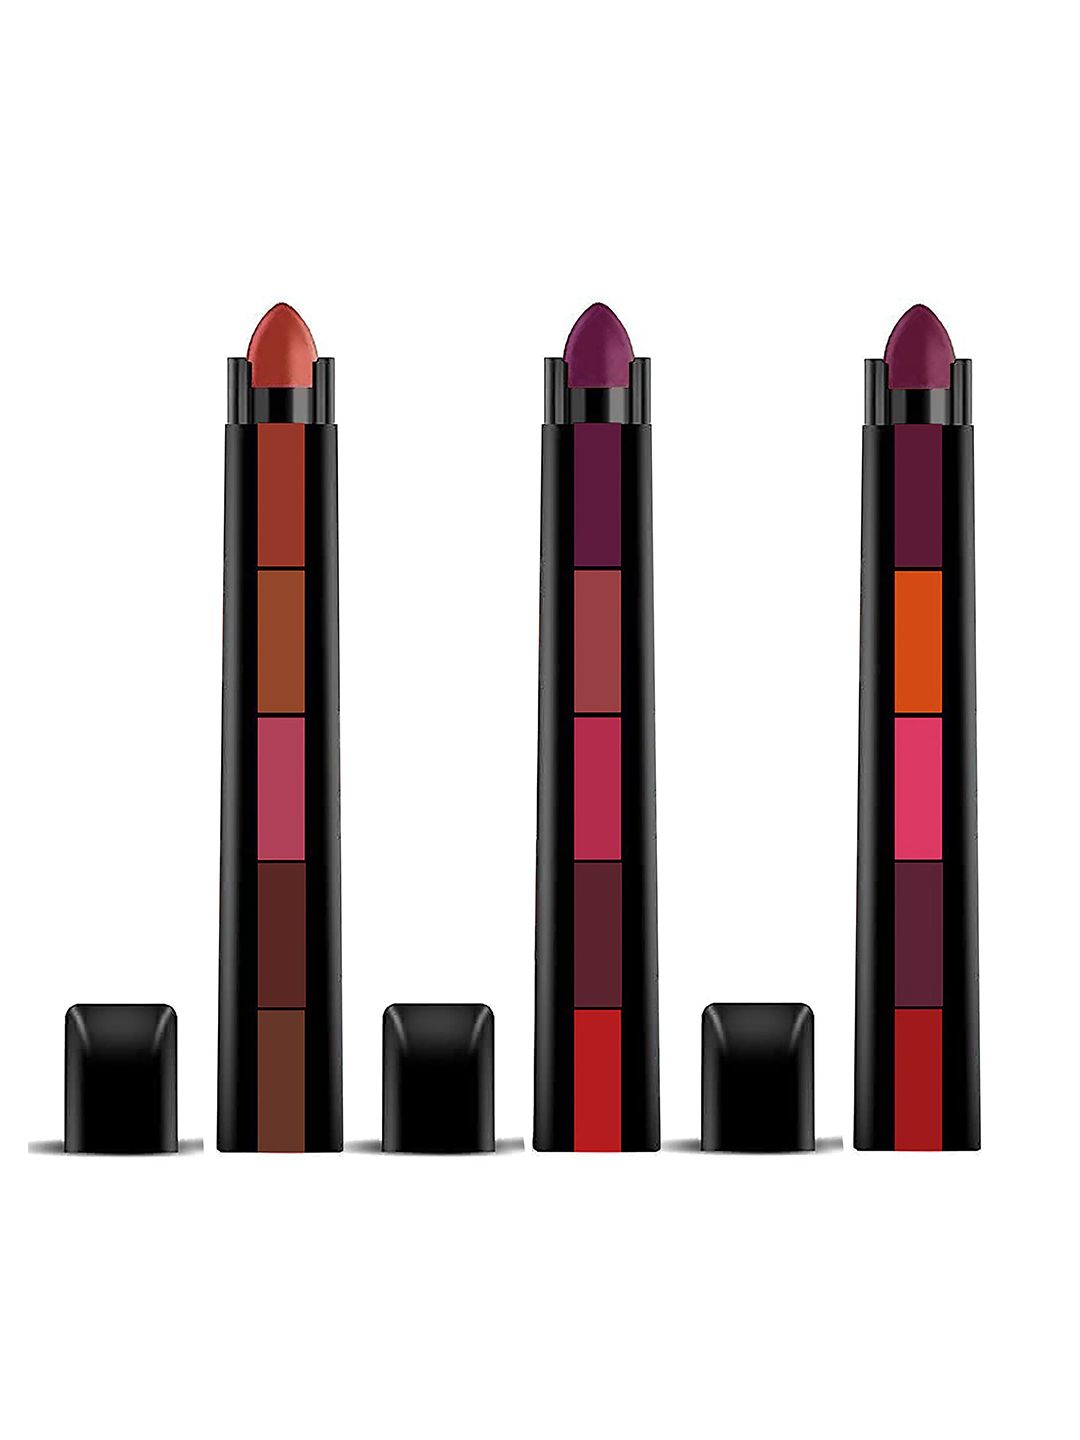 Ronzille Women Set Of 3 Fantastic 5in1 Matte Lipstick Shade A,B,C - 10 g each Price in India